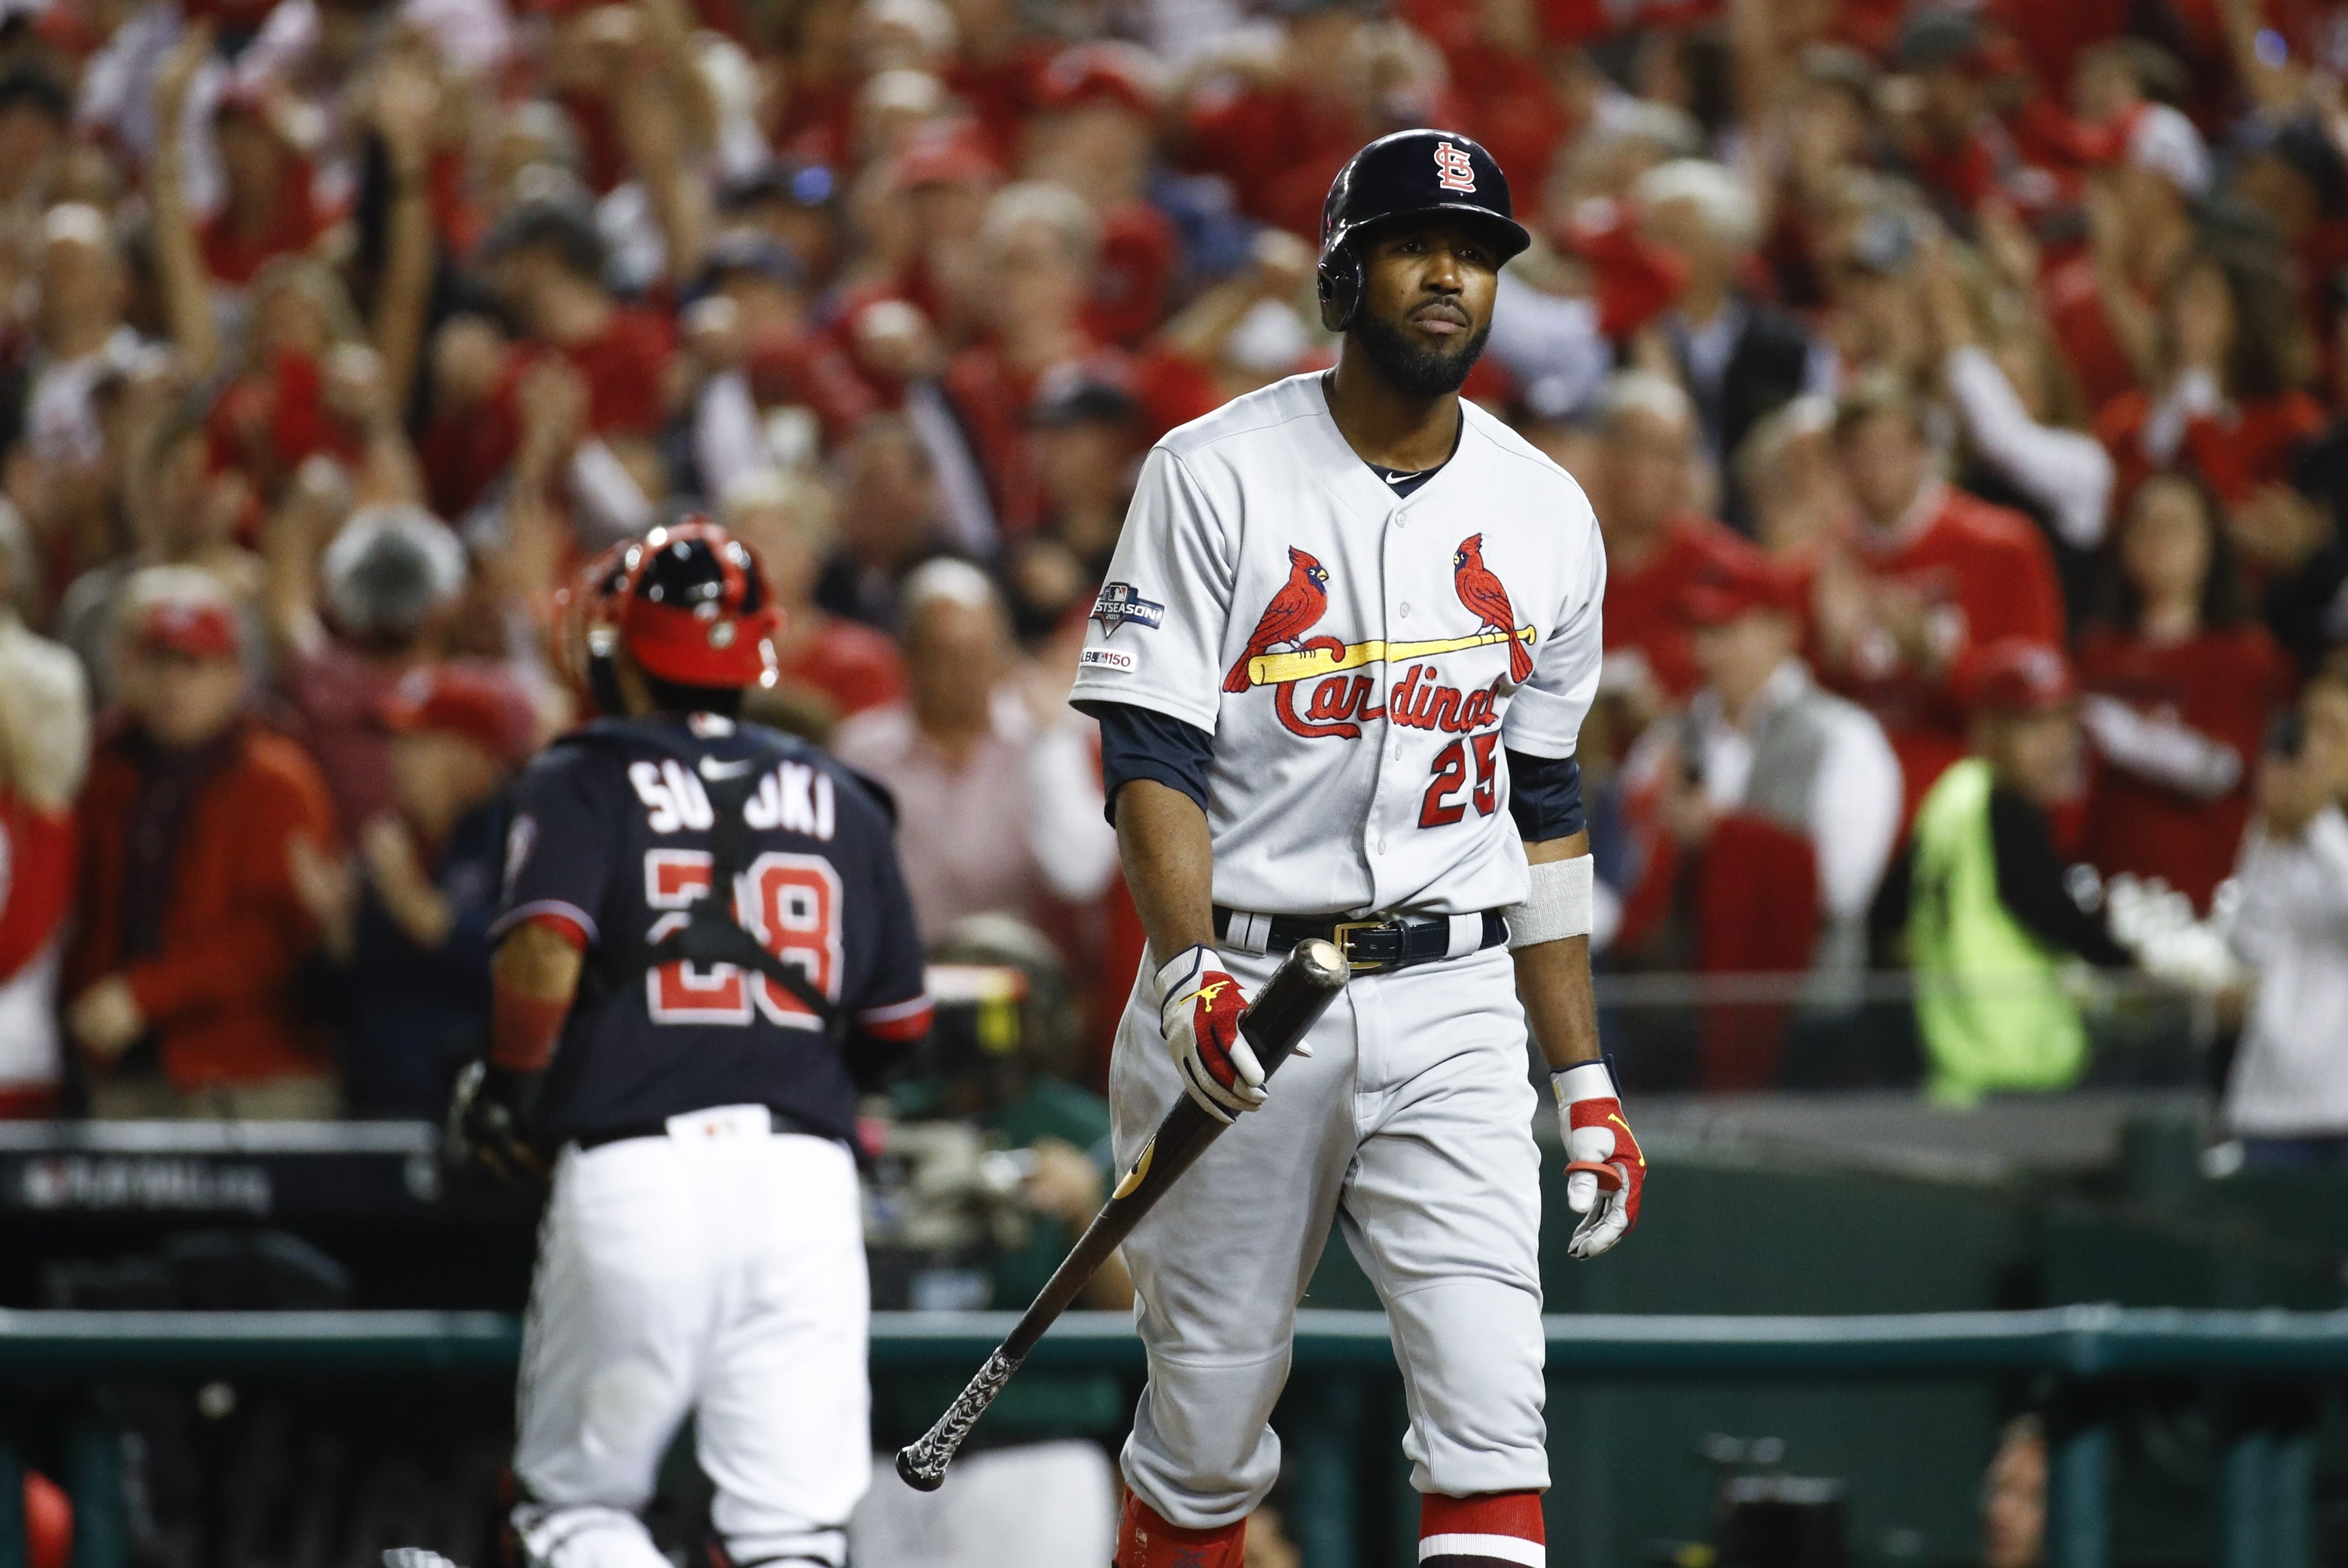 Down 3-0 in NLCS, slumping Cardinals make lineup changes